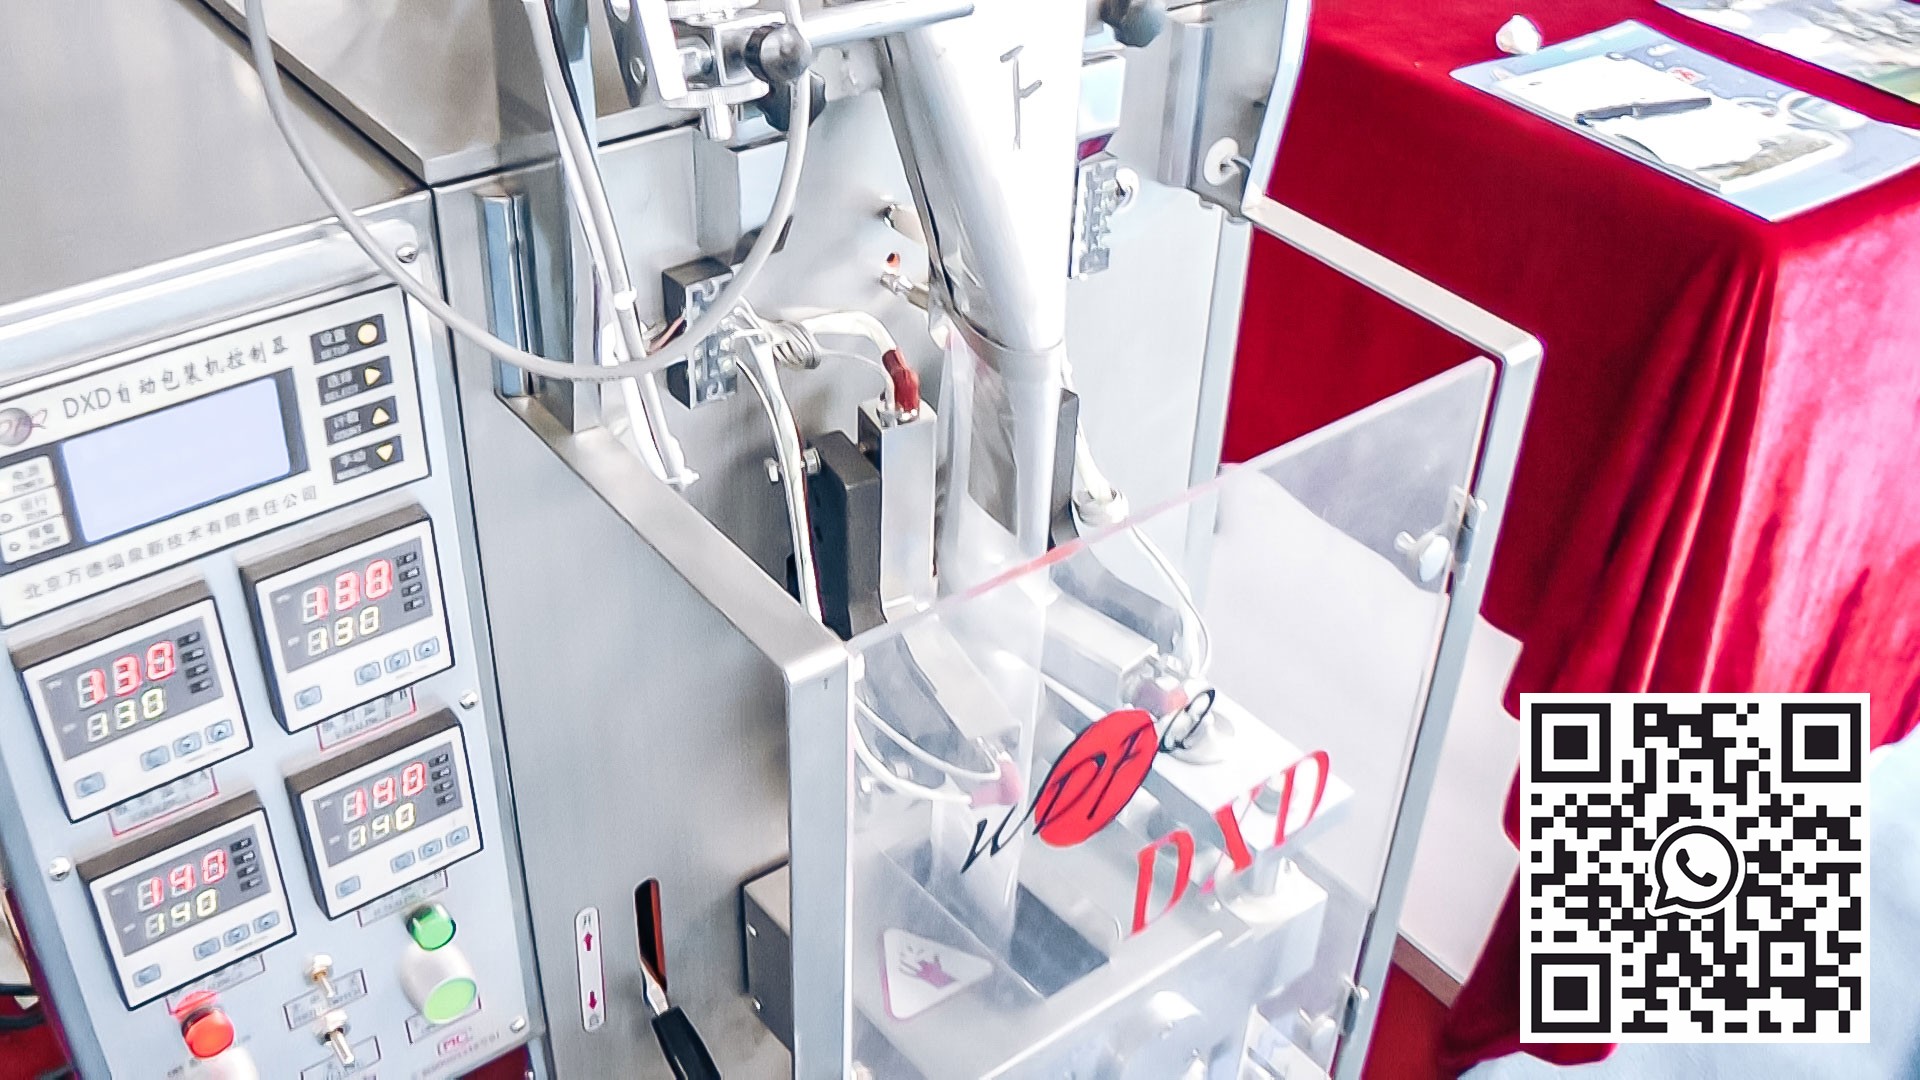 Automatic equipment for packing powders and granules into plastic bags in pharmaceutical production